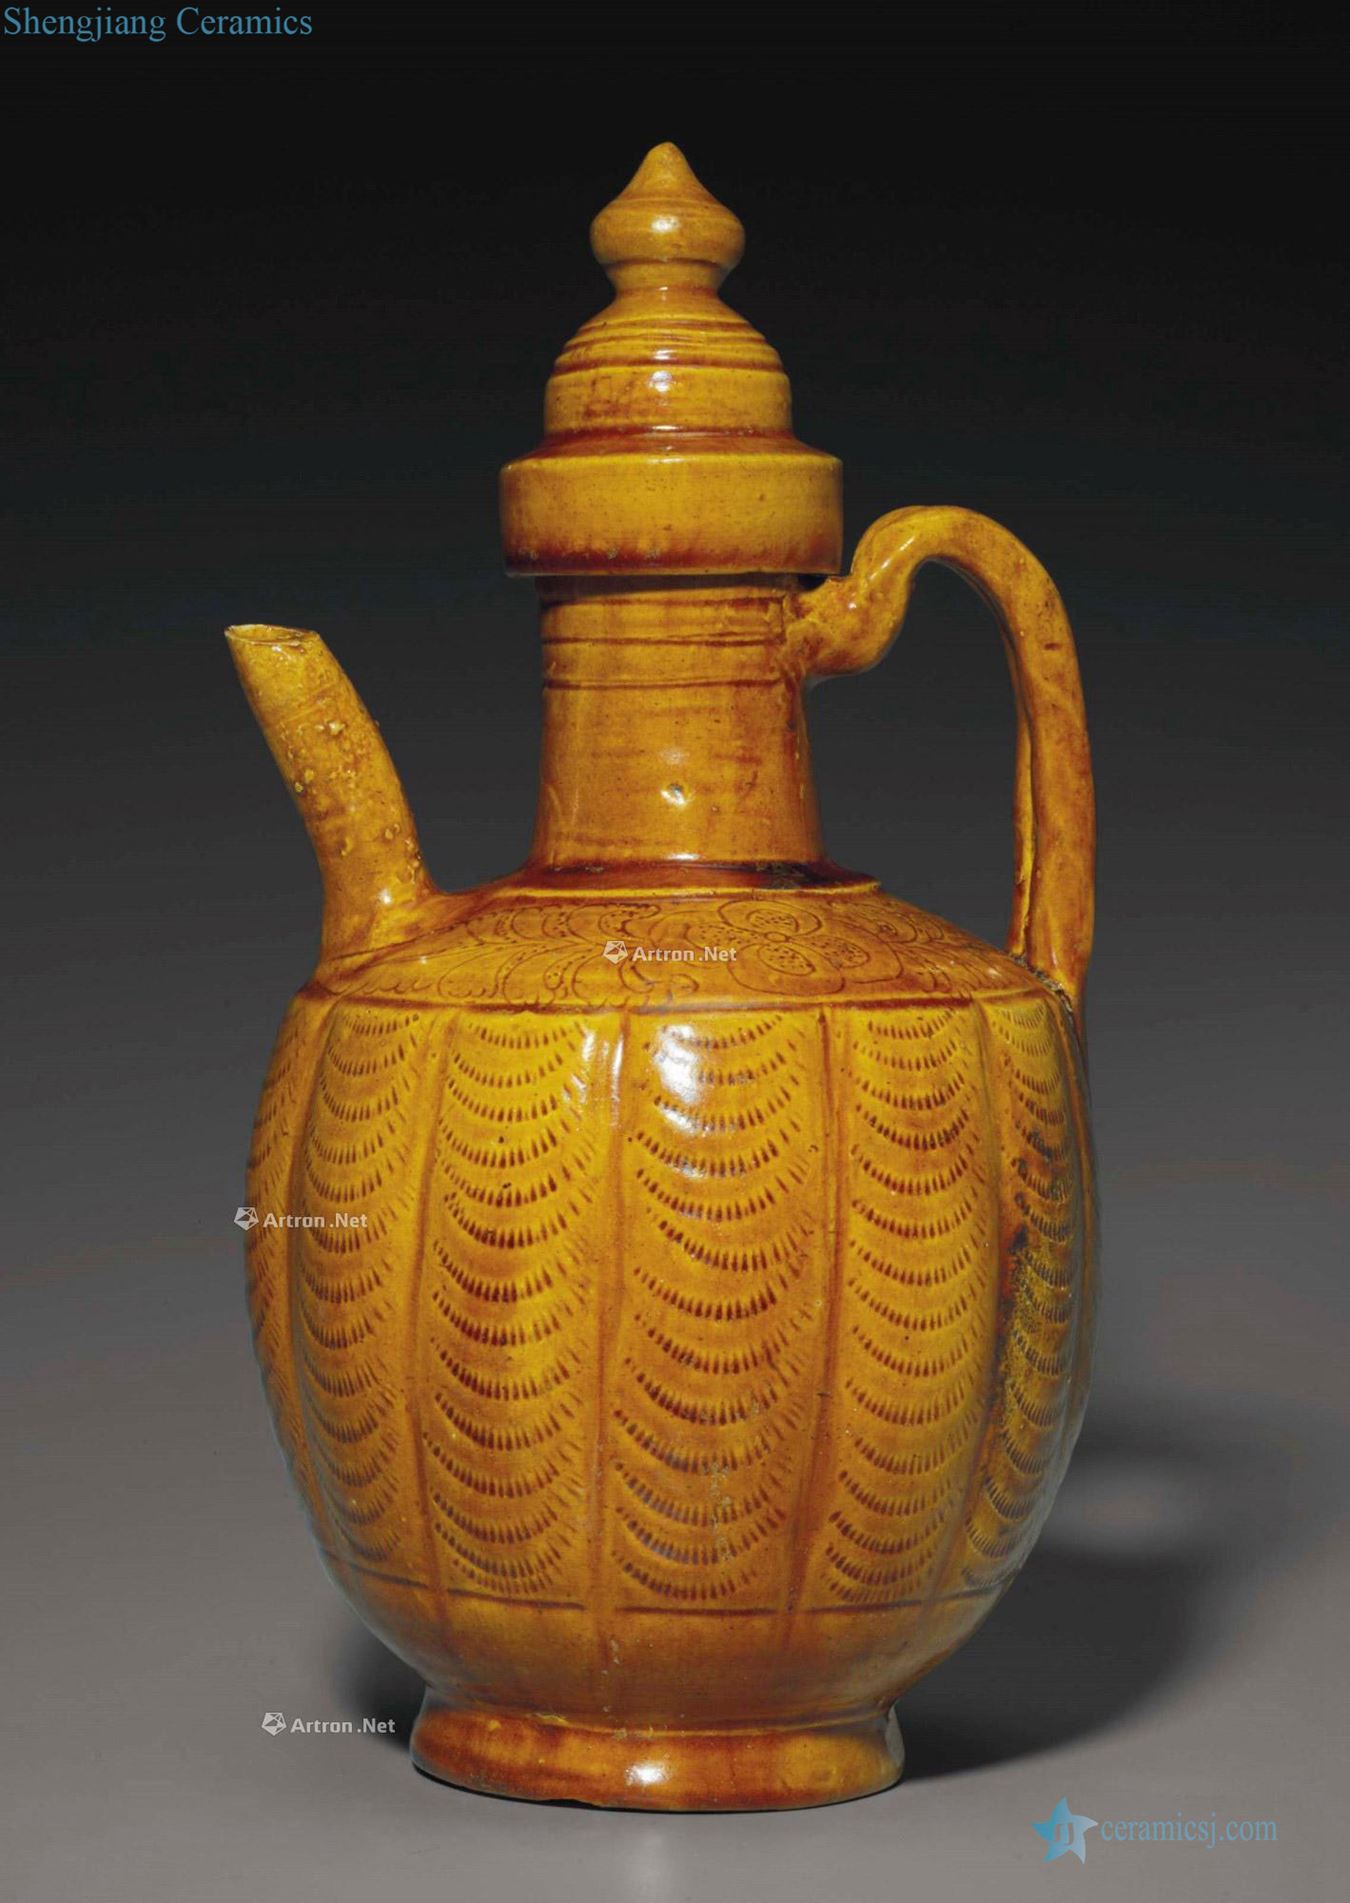 LIAO DYNASTY, 10 th ~ 11 th CENTURY AN AMBER - GLAZED EWER AND COVER